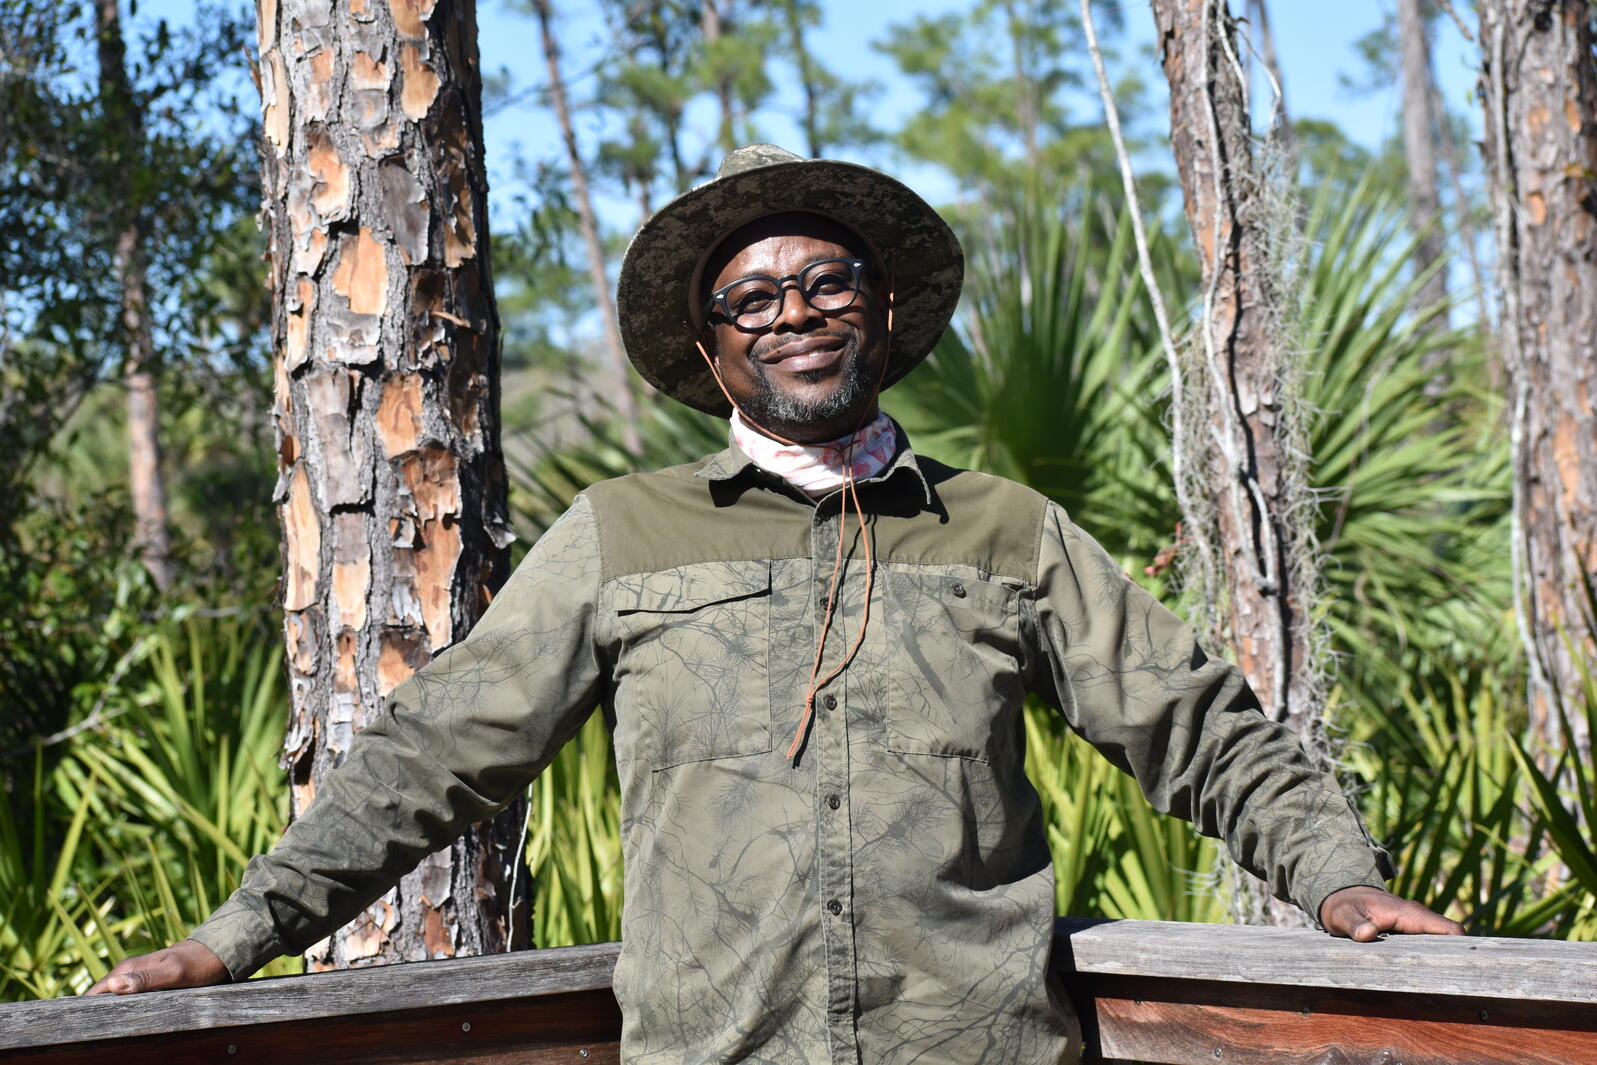 A smiling man in camouflage 